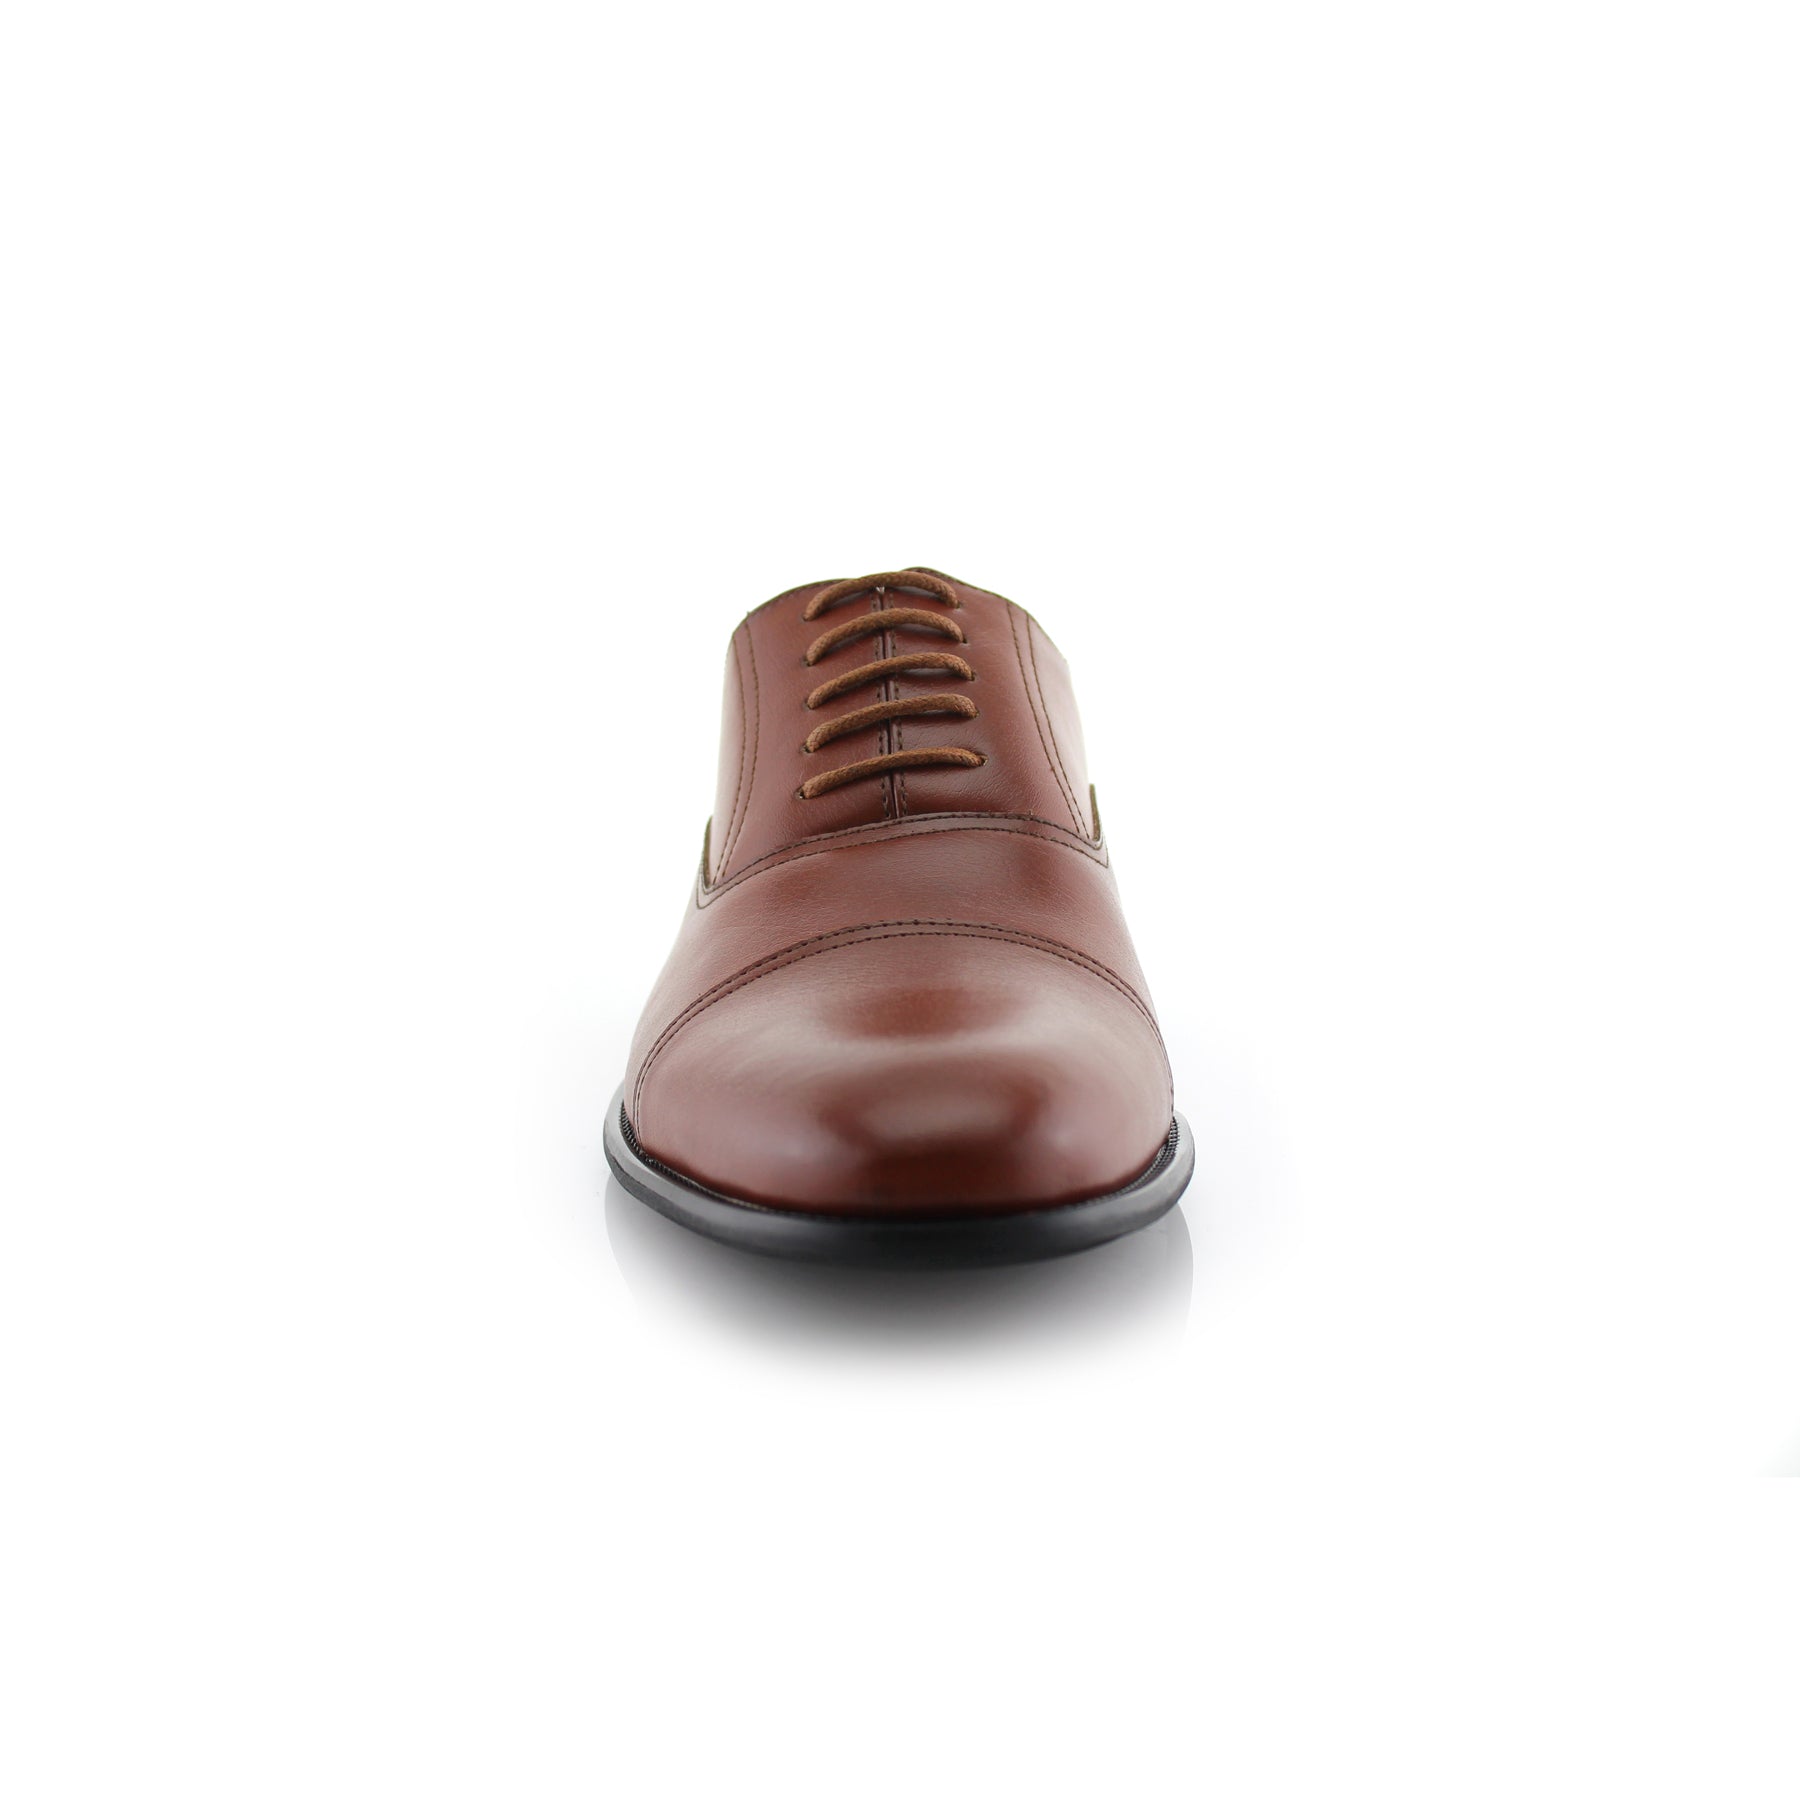 Classic Cap-Toe Oxford Dress Shoes | Charles by Ferro Aldo | Conal Footwear | Front Angle View